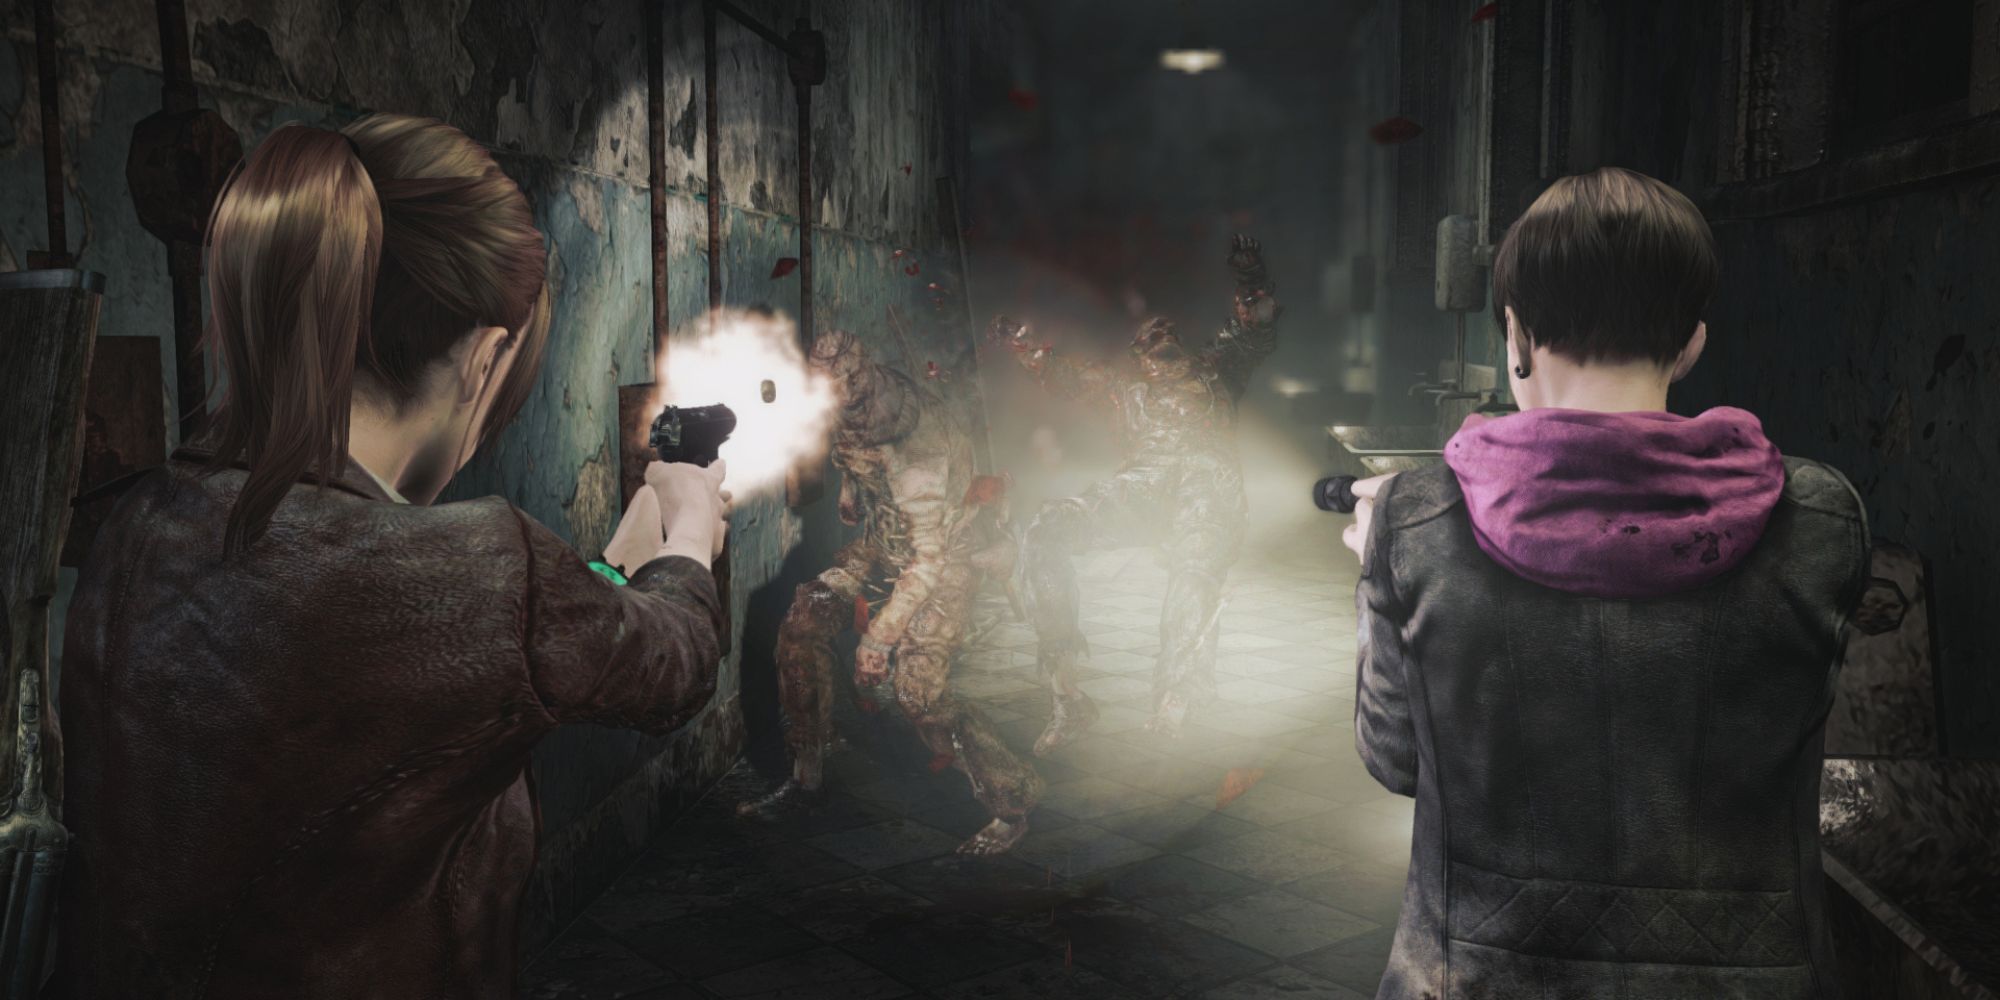 Claire Redfield and Moira Burton shoot enemies in a dark hallway in Resident Evil Revelations 2.